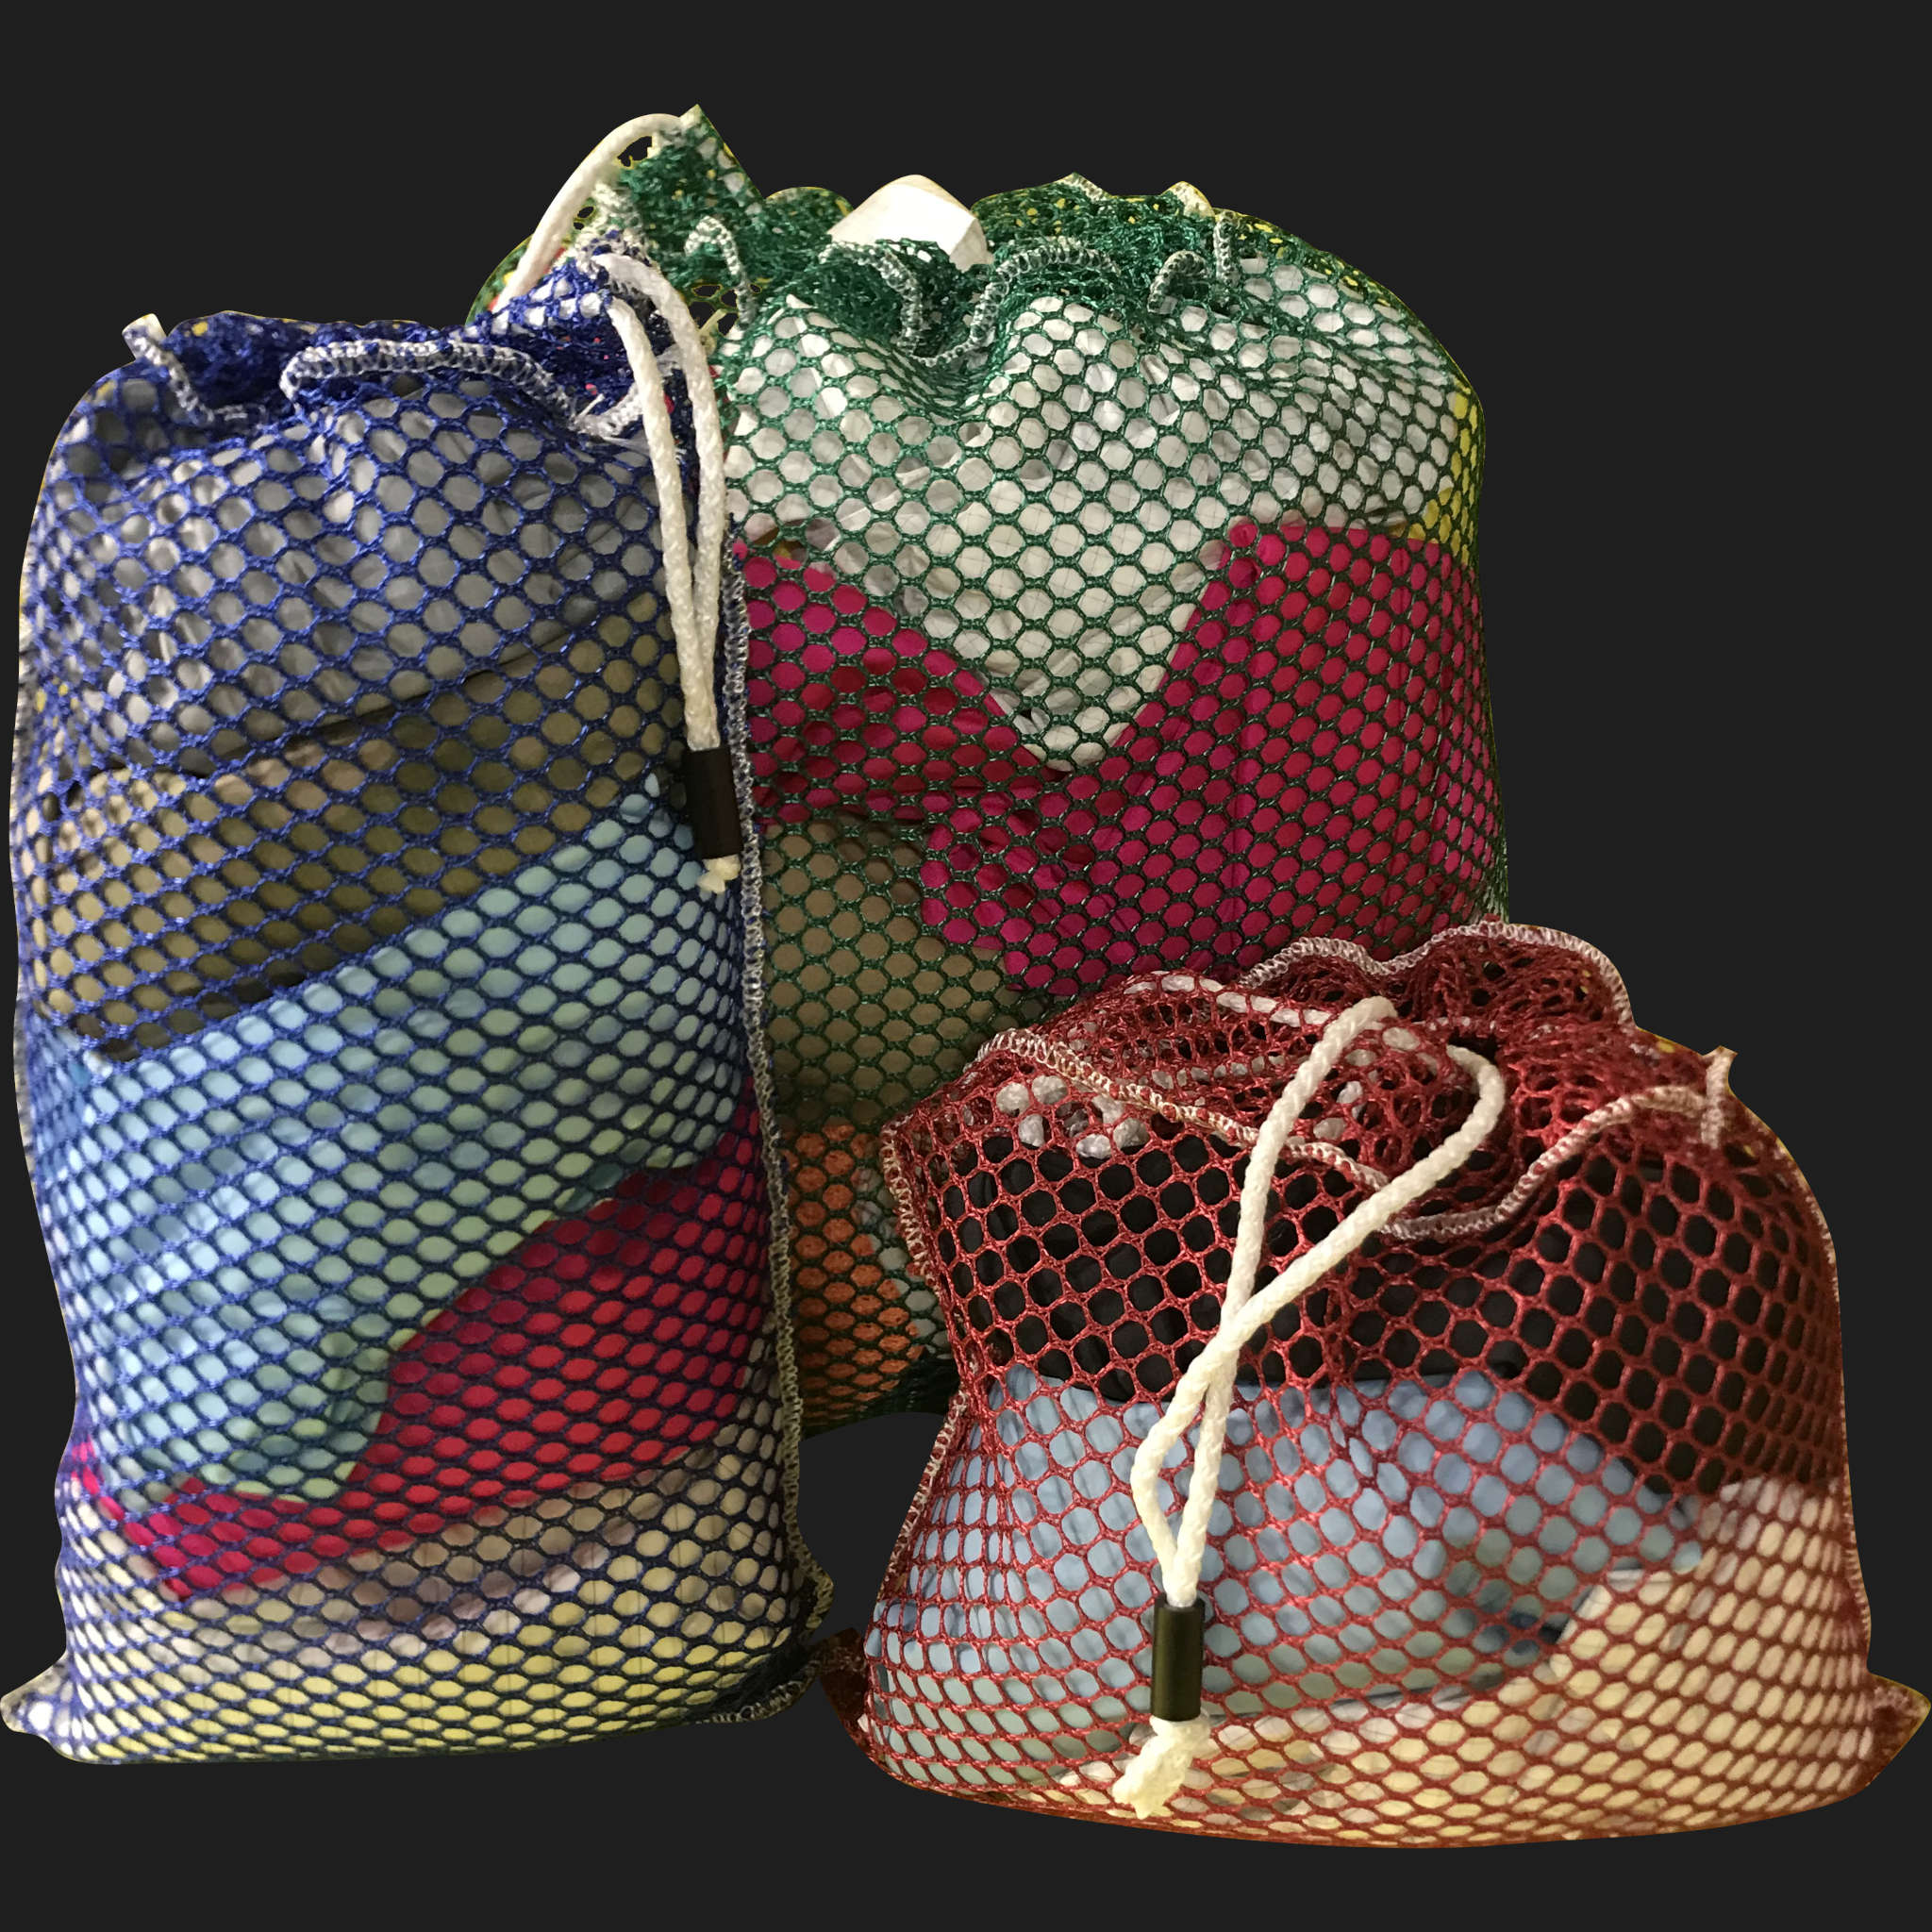 38" x 48" Customized Mesh-Net-Laundry Bags Heavy Duty with Cord and barrellock closure